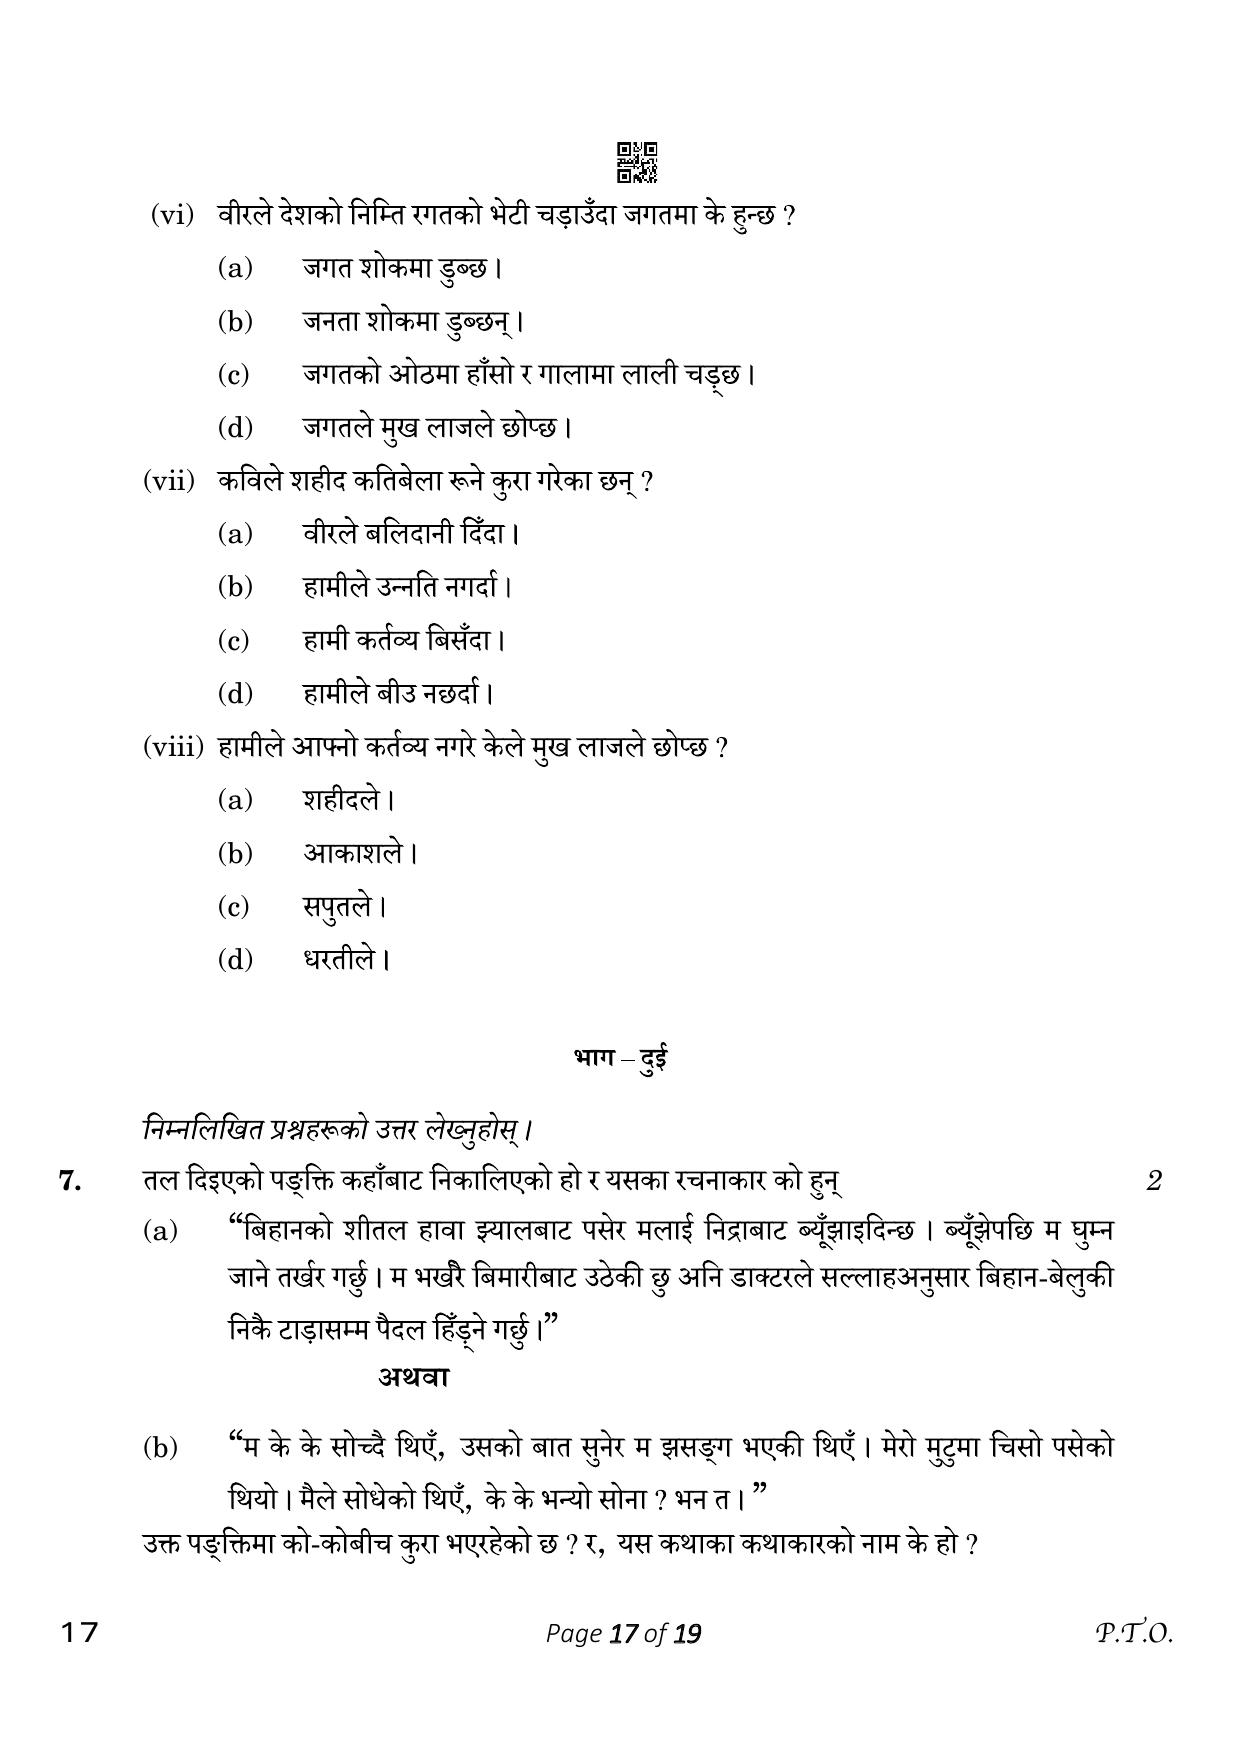 CBSE Class 10 Nepali (Compartment) 2023 Question Paper - Page 17